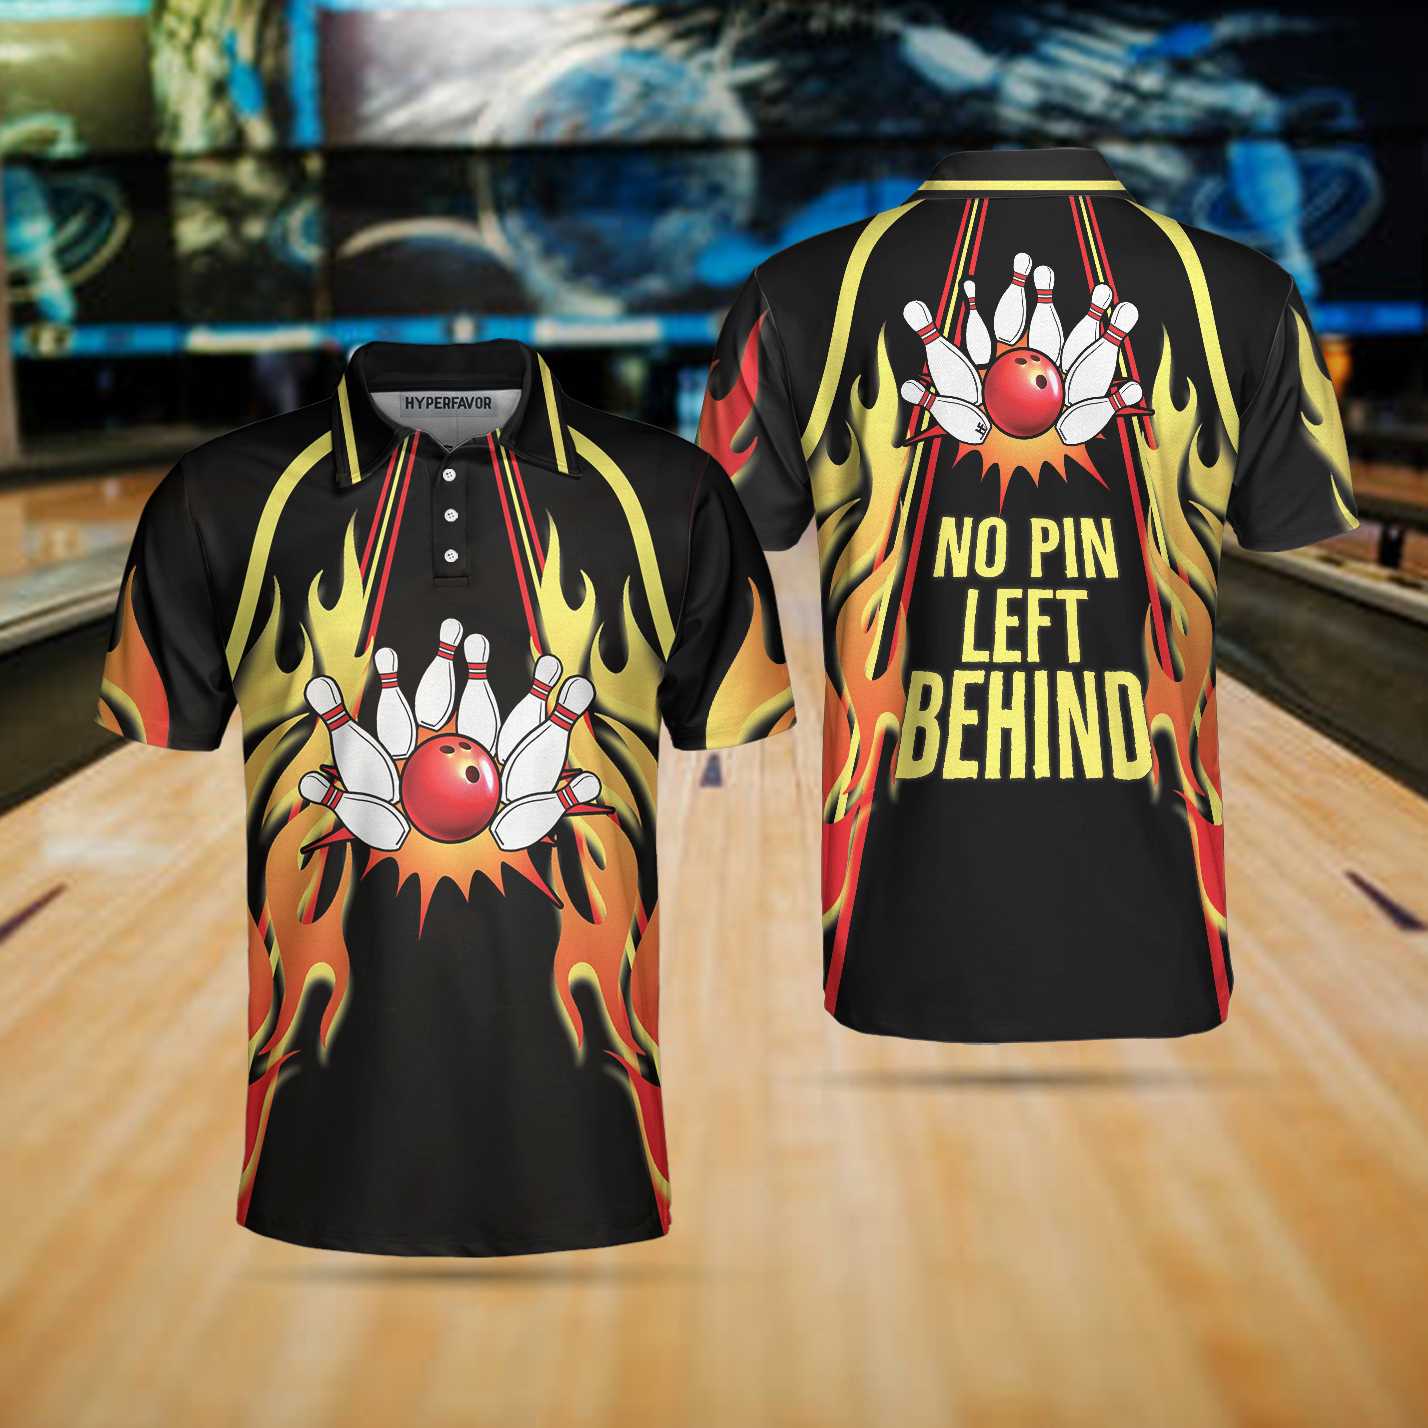 No Pin Left Behind Bowling Polo Shirt/ Black Shirt With Flames/ Polo Style Bowling Shirt For Men Coolspod